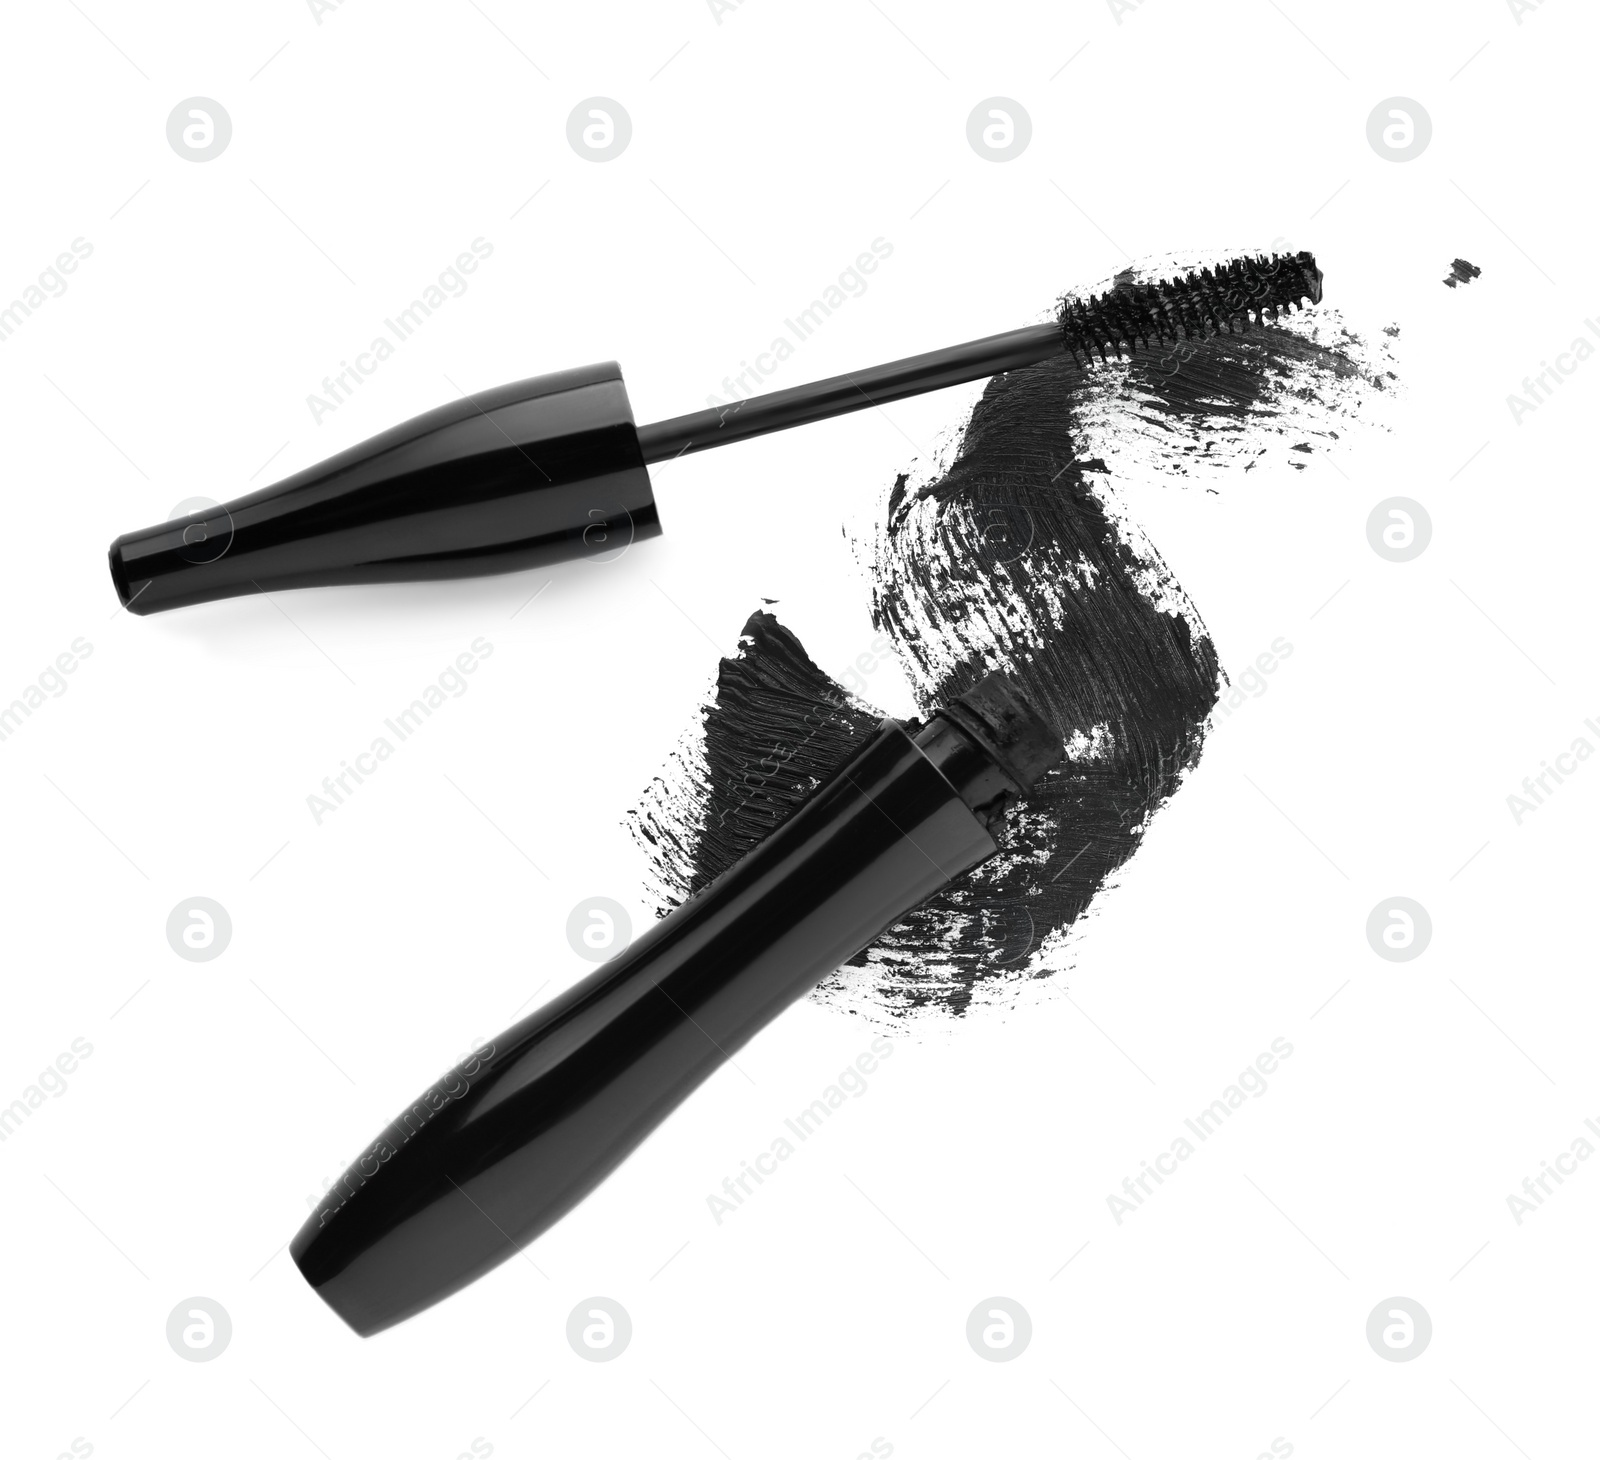 Photo of Applicator, mascara for eyelashes and black smear on white background, top view